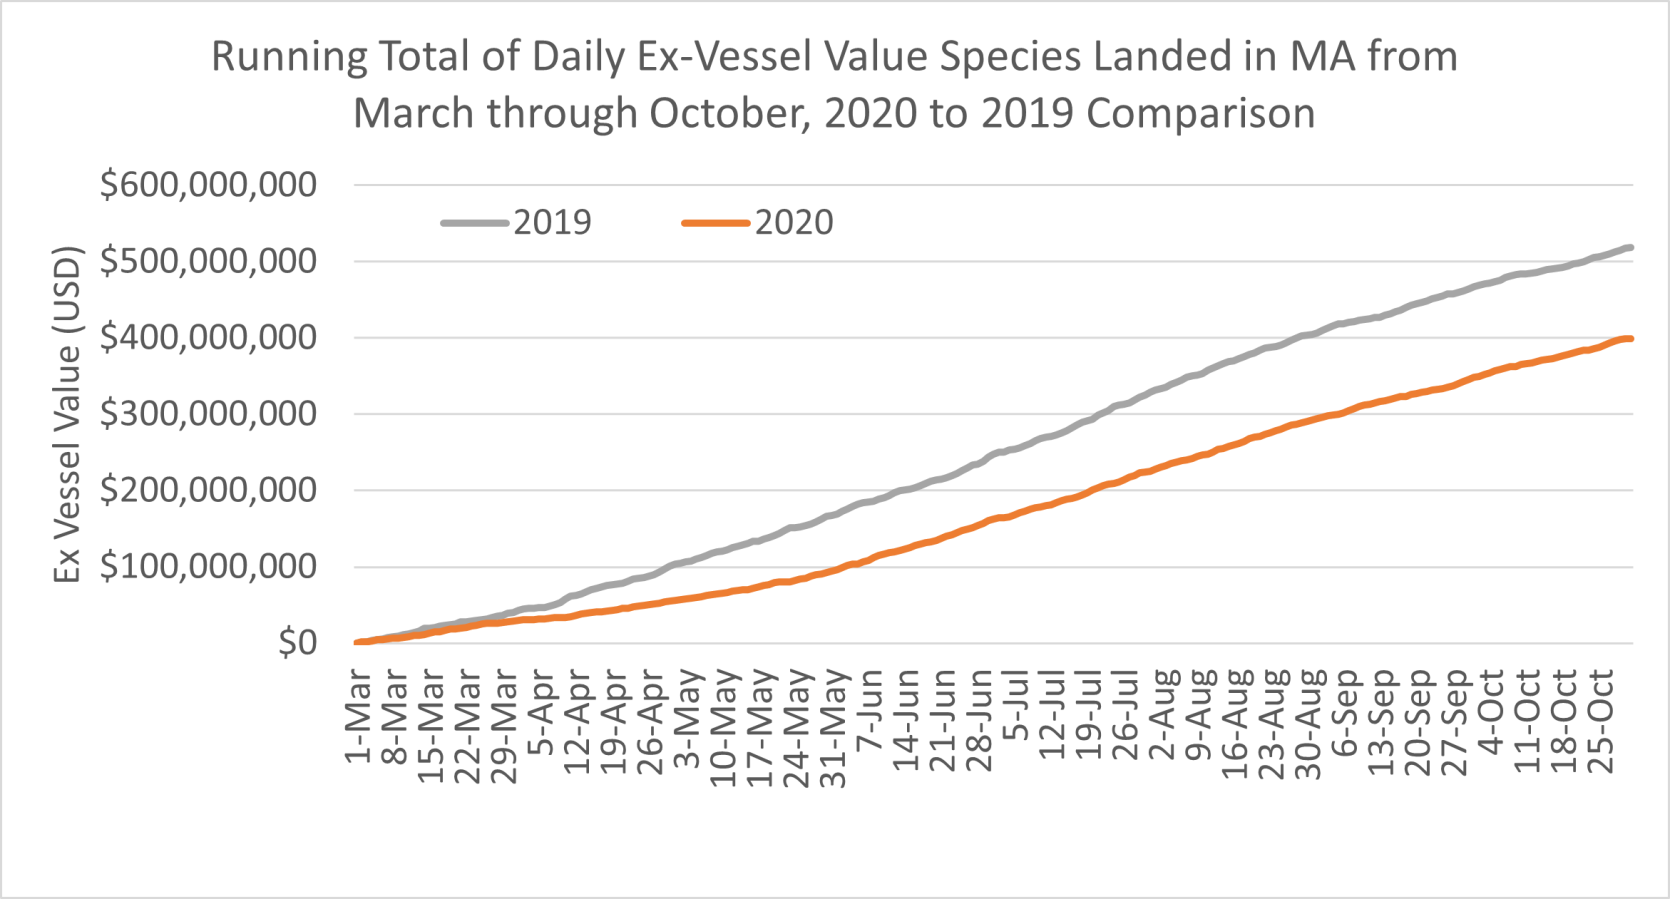 Running Total of Daily Ex-Vessel Value Species Landed in MA from March to October, 2020 to 2019 Comparison